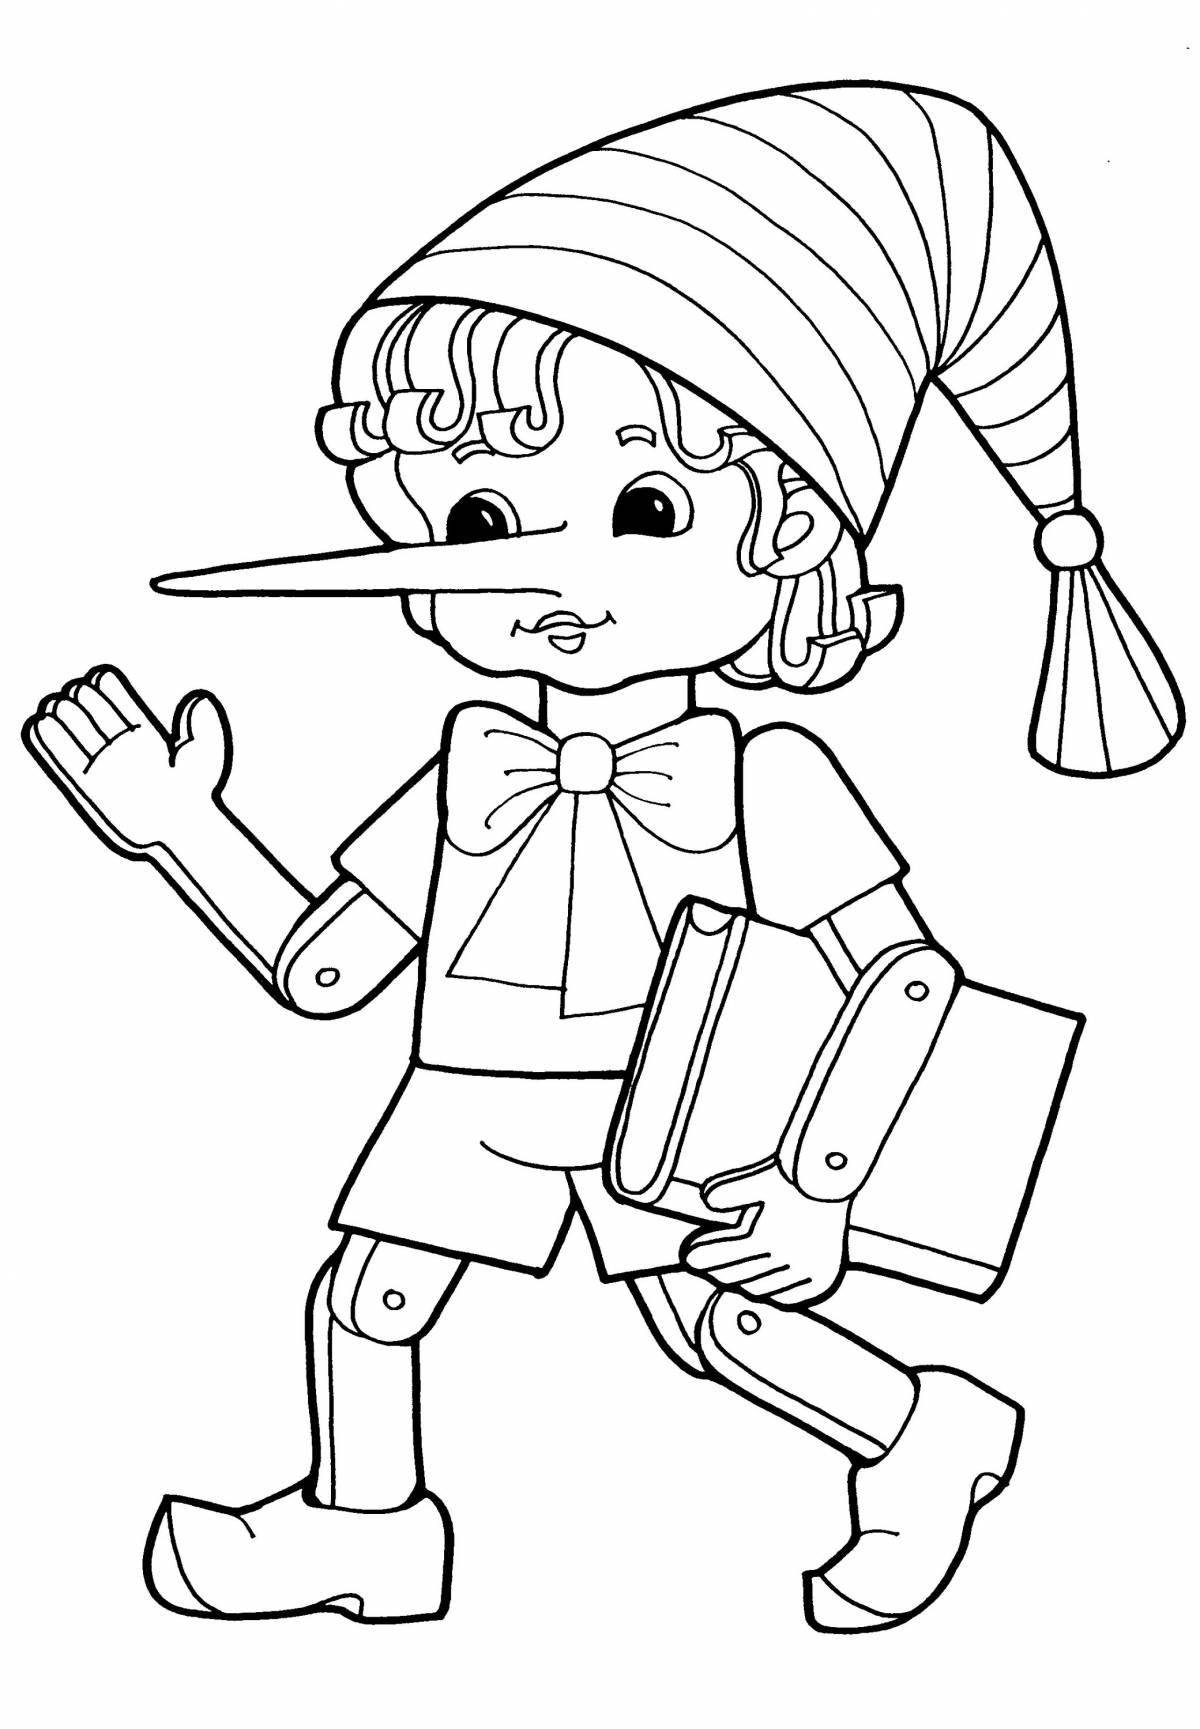 Creative character coloring pages